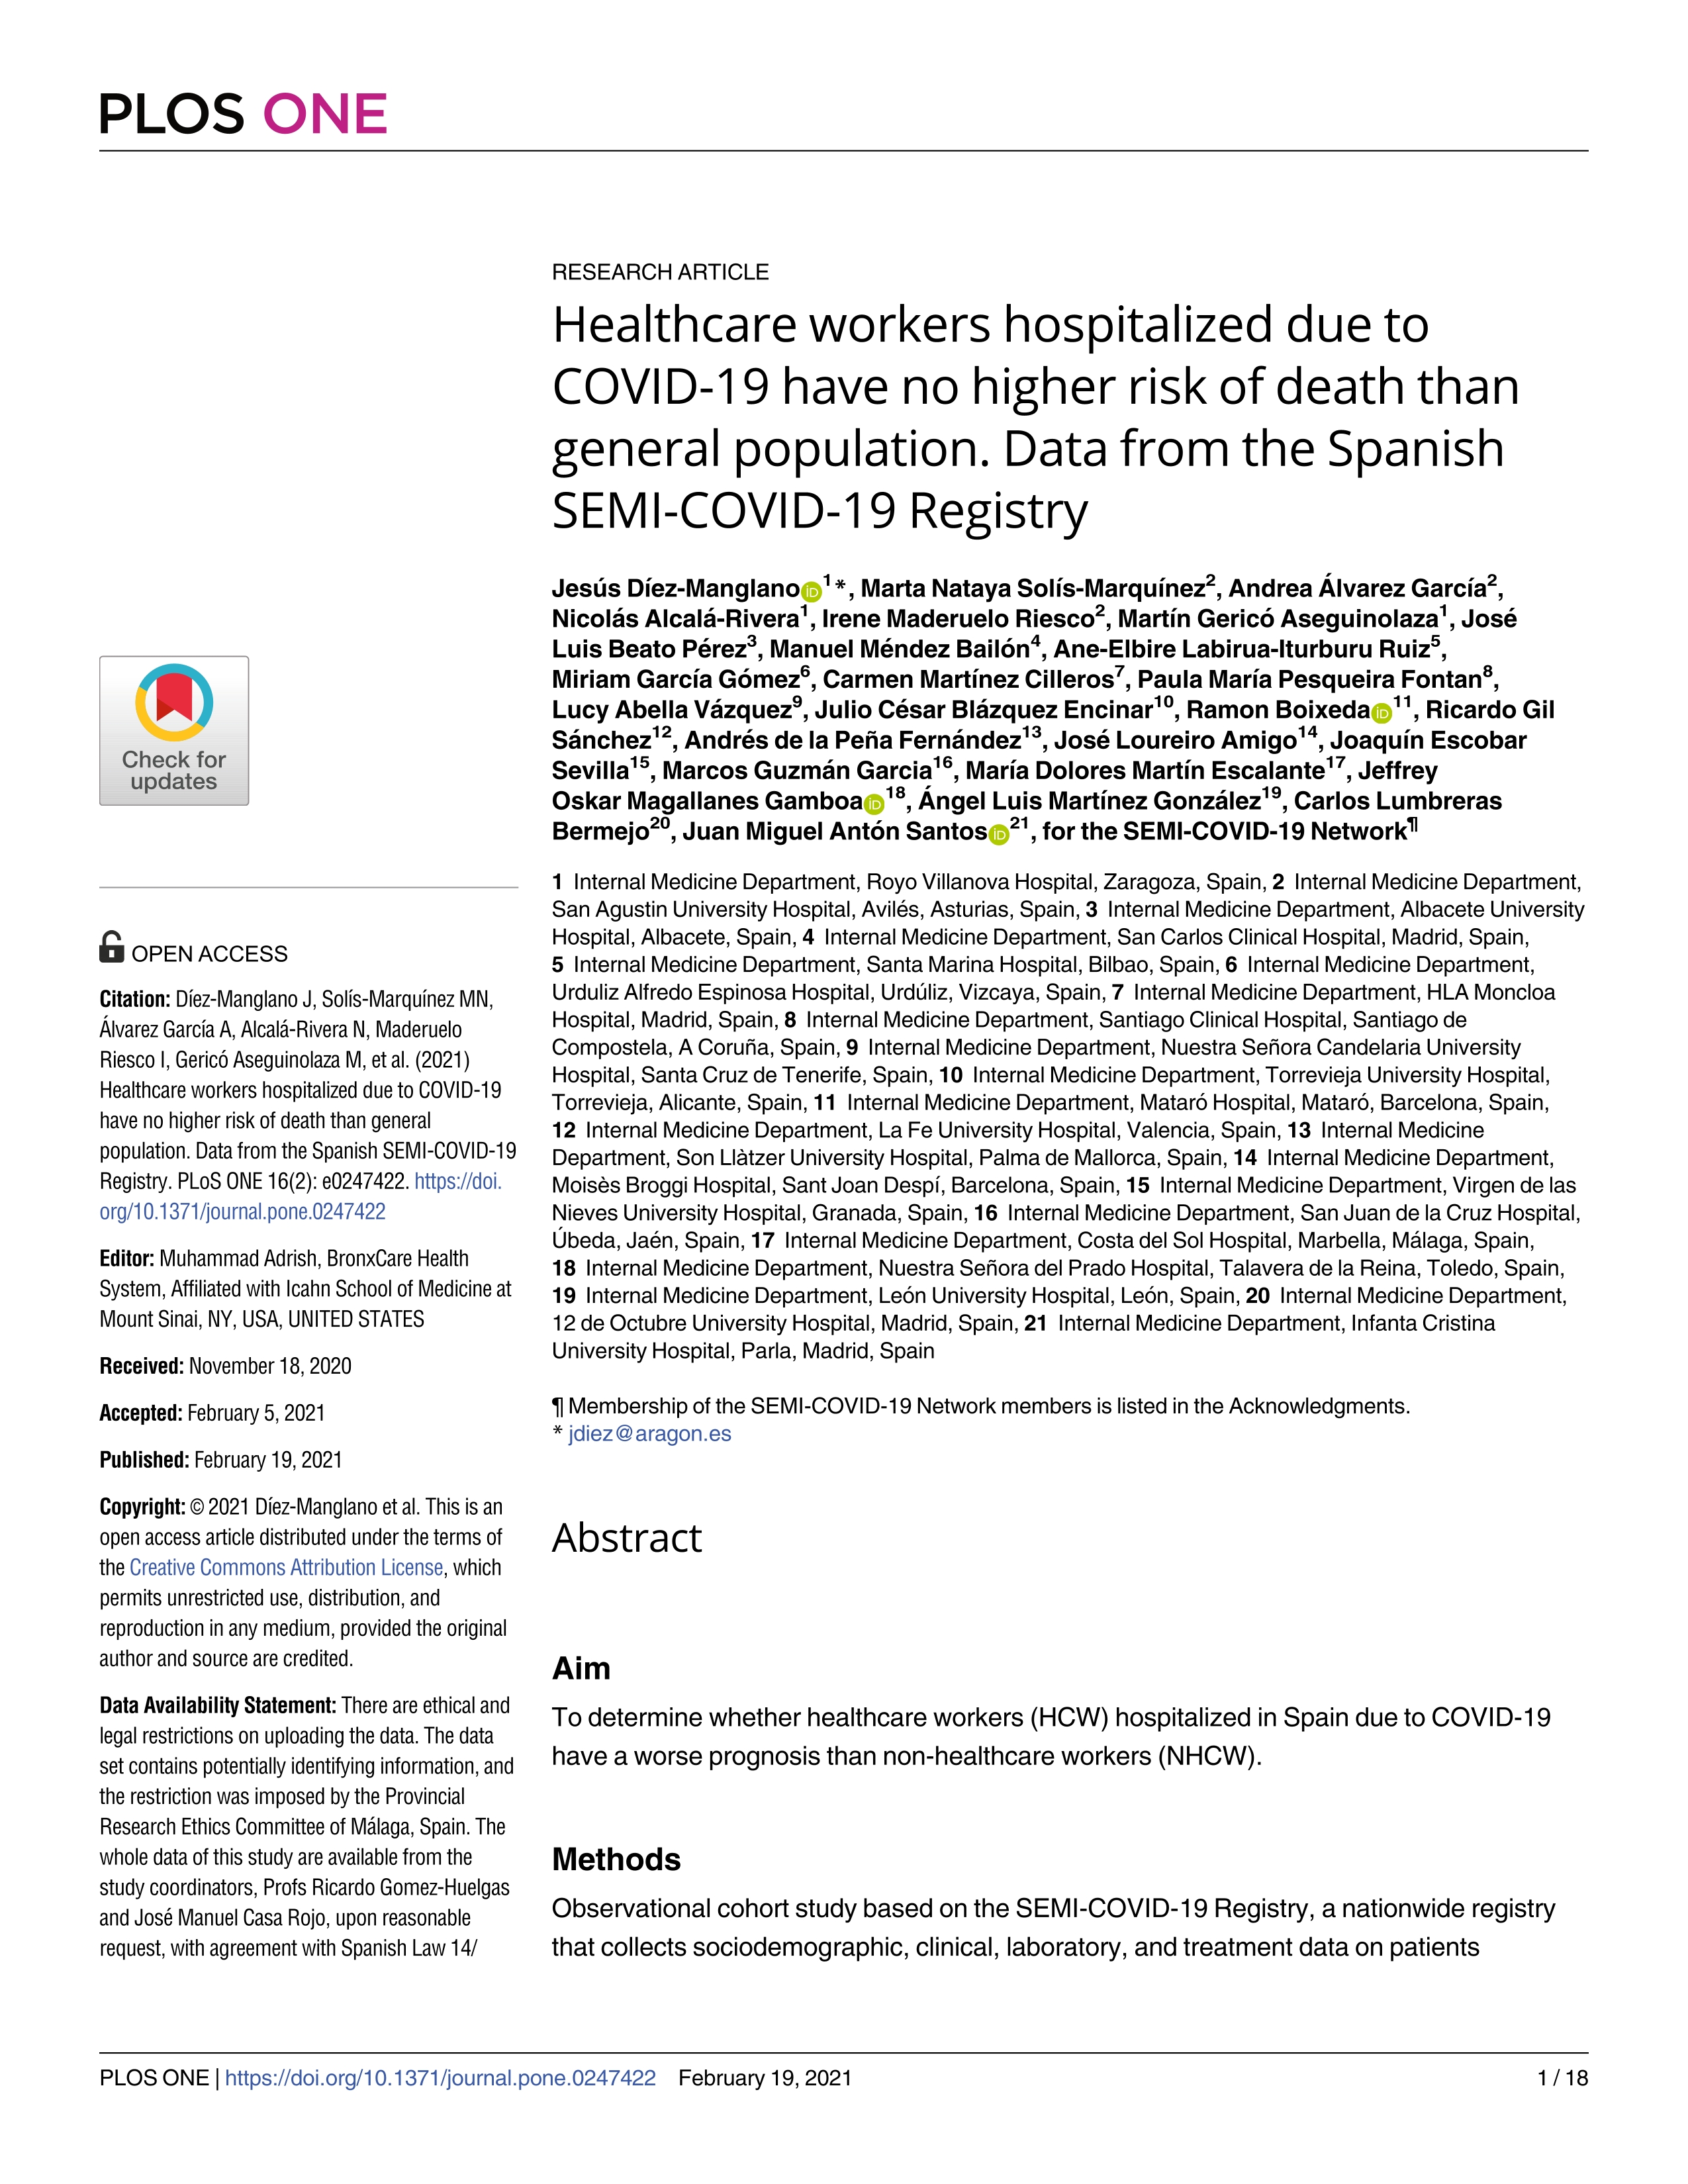 Healthcare workers hospitalized due to COVID-19 have no higher risk of death than general population. Data from the Spanish SEMI-COVID-19 Registry